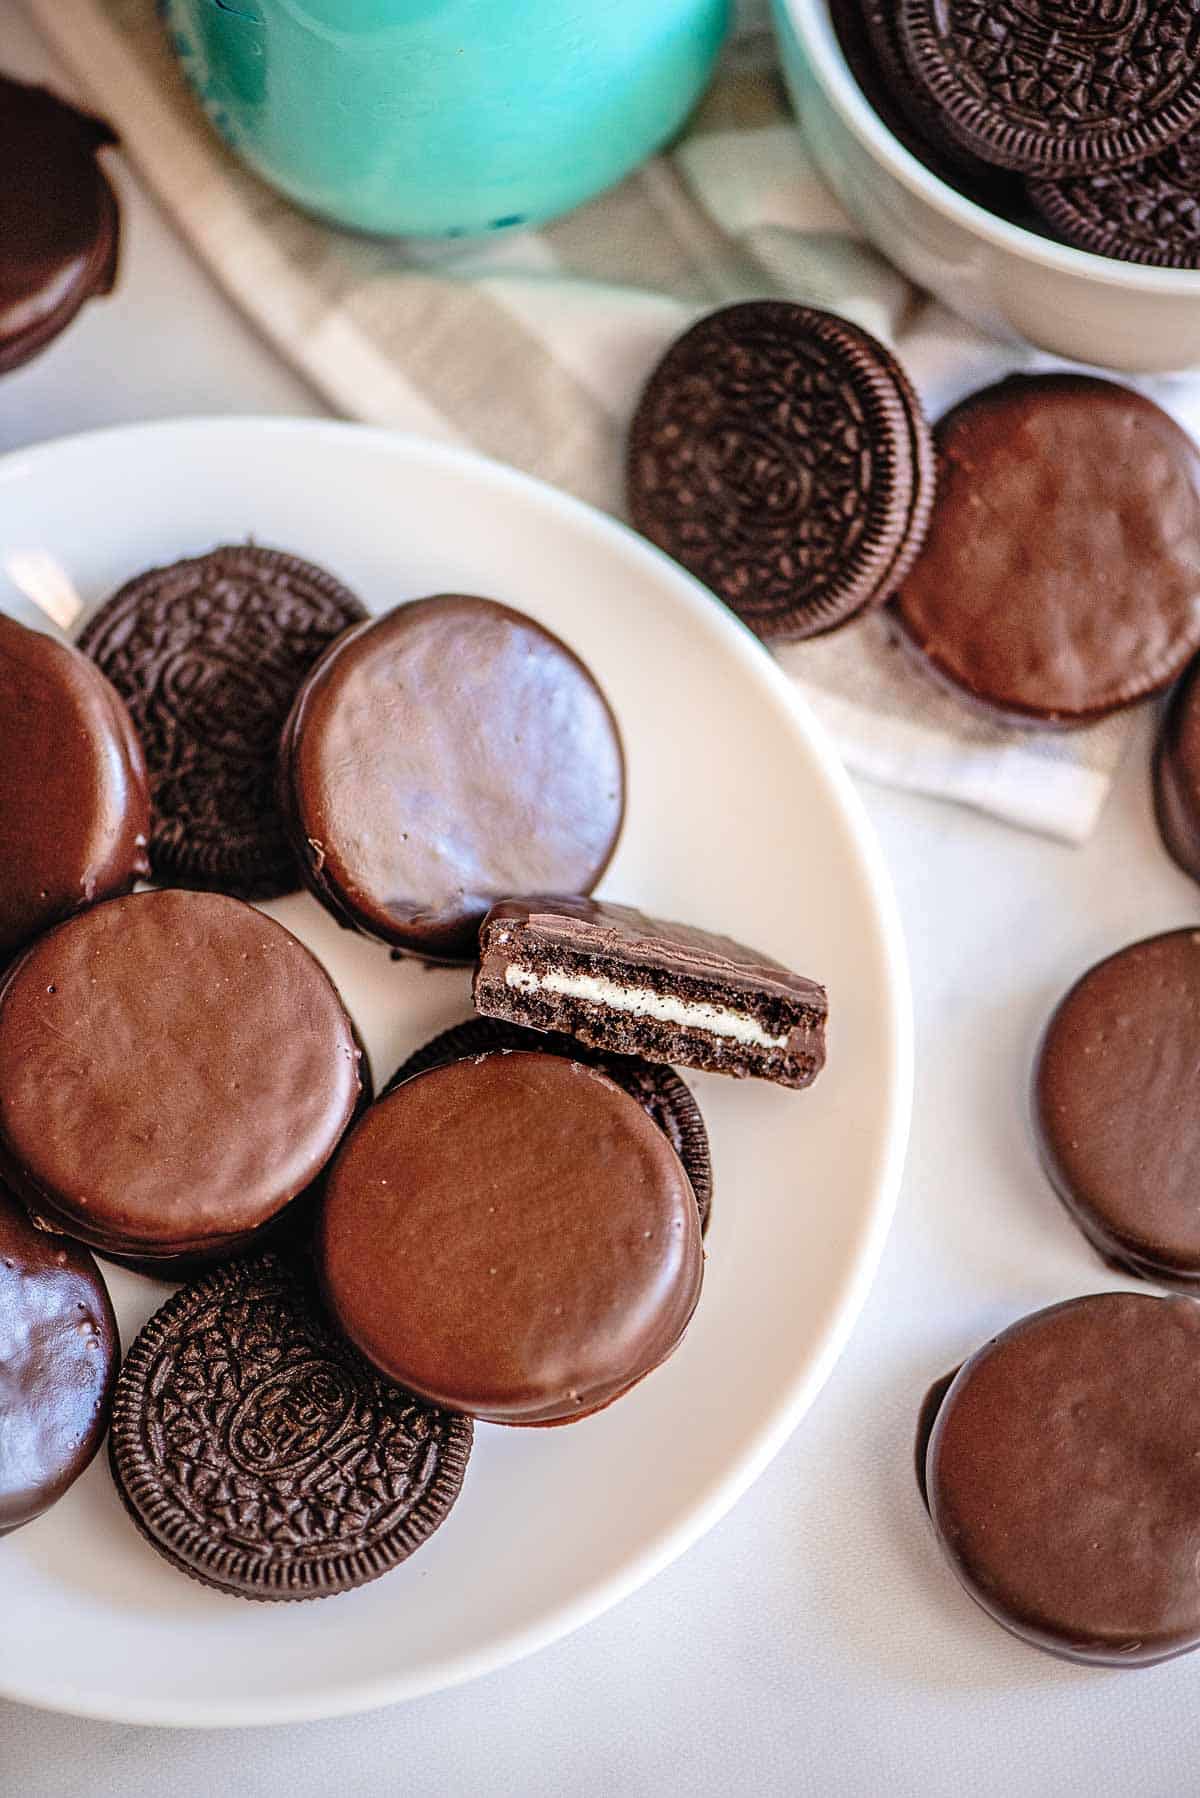 chocolate covered oreos with middle showing.